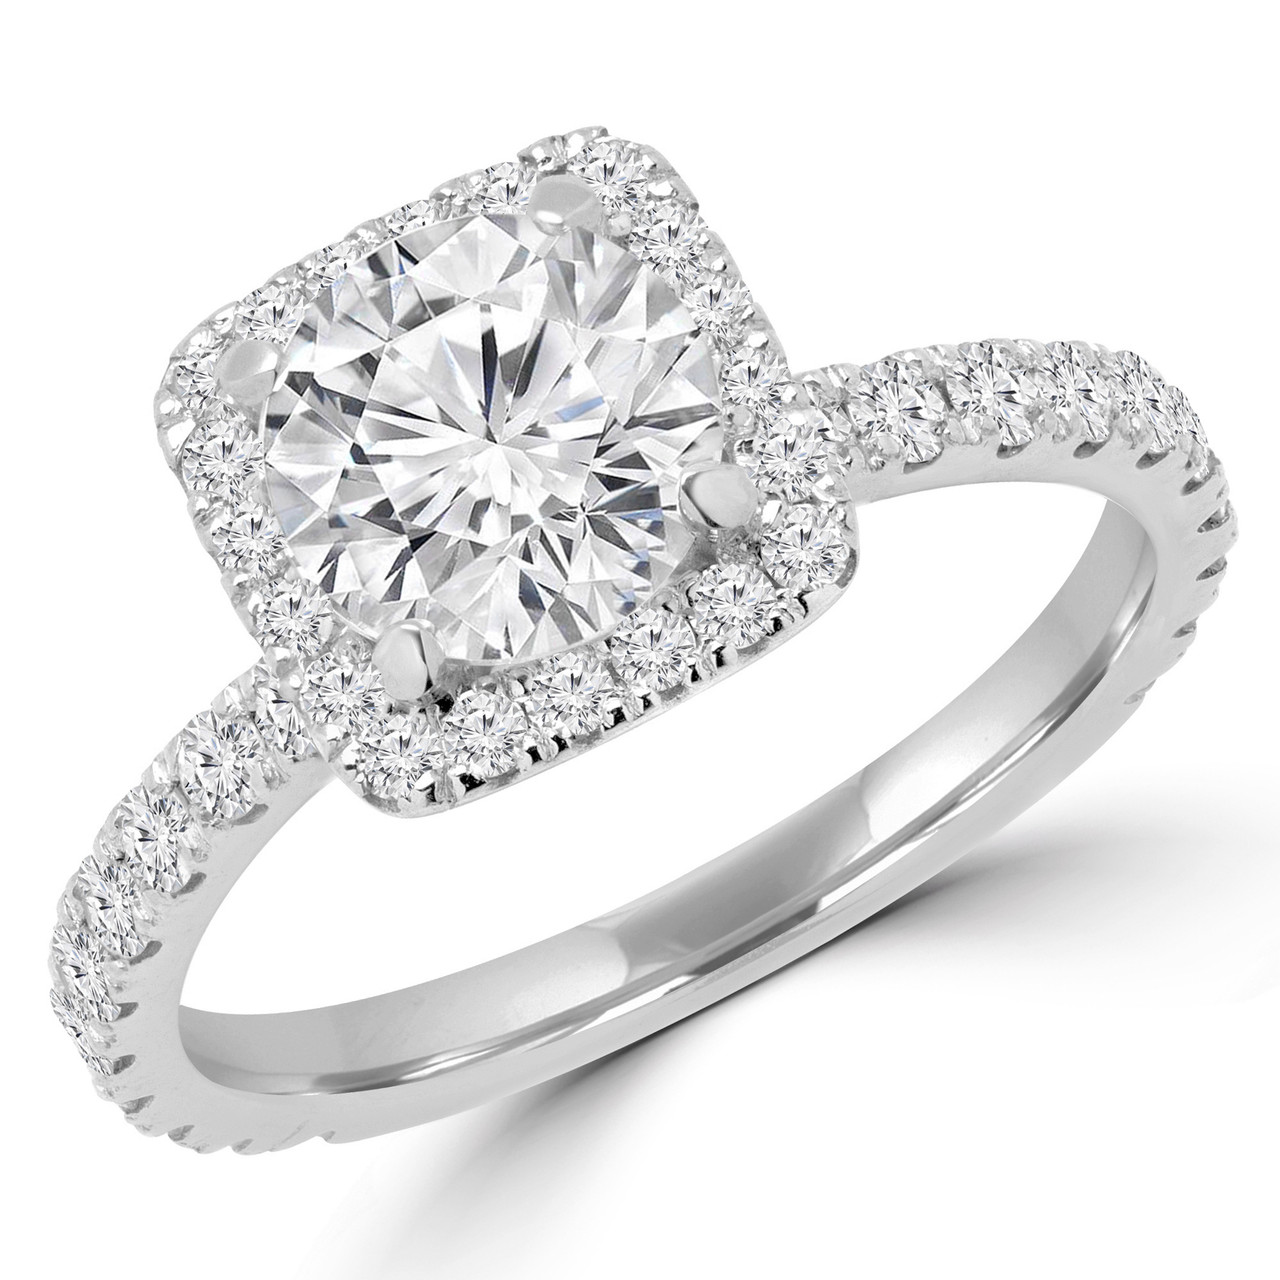 21 Timeless Round-Cut Engagement Rings That Are So Romantic